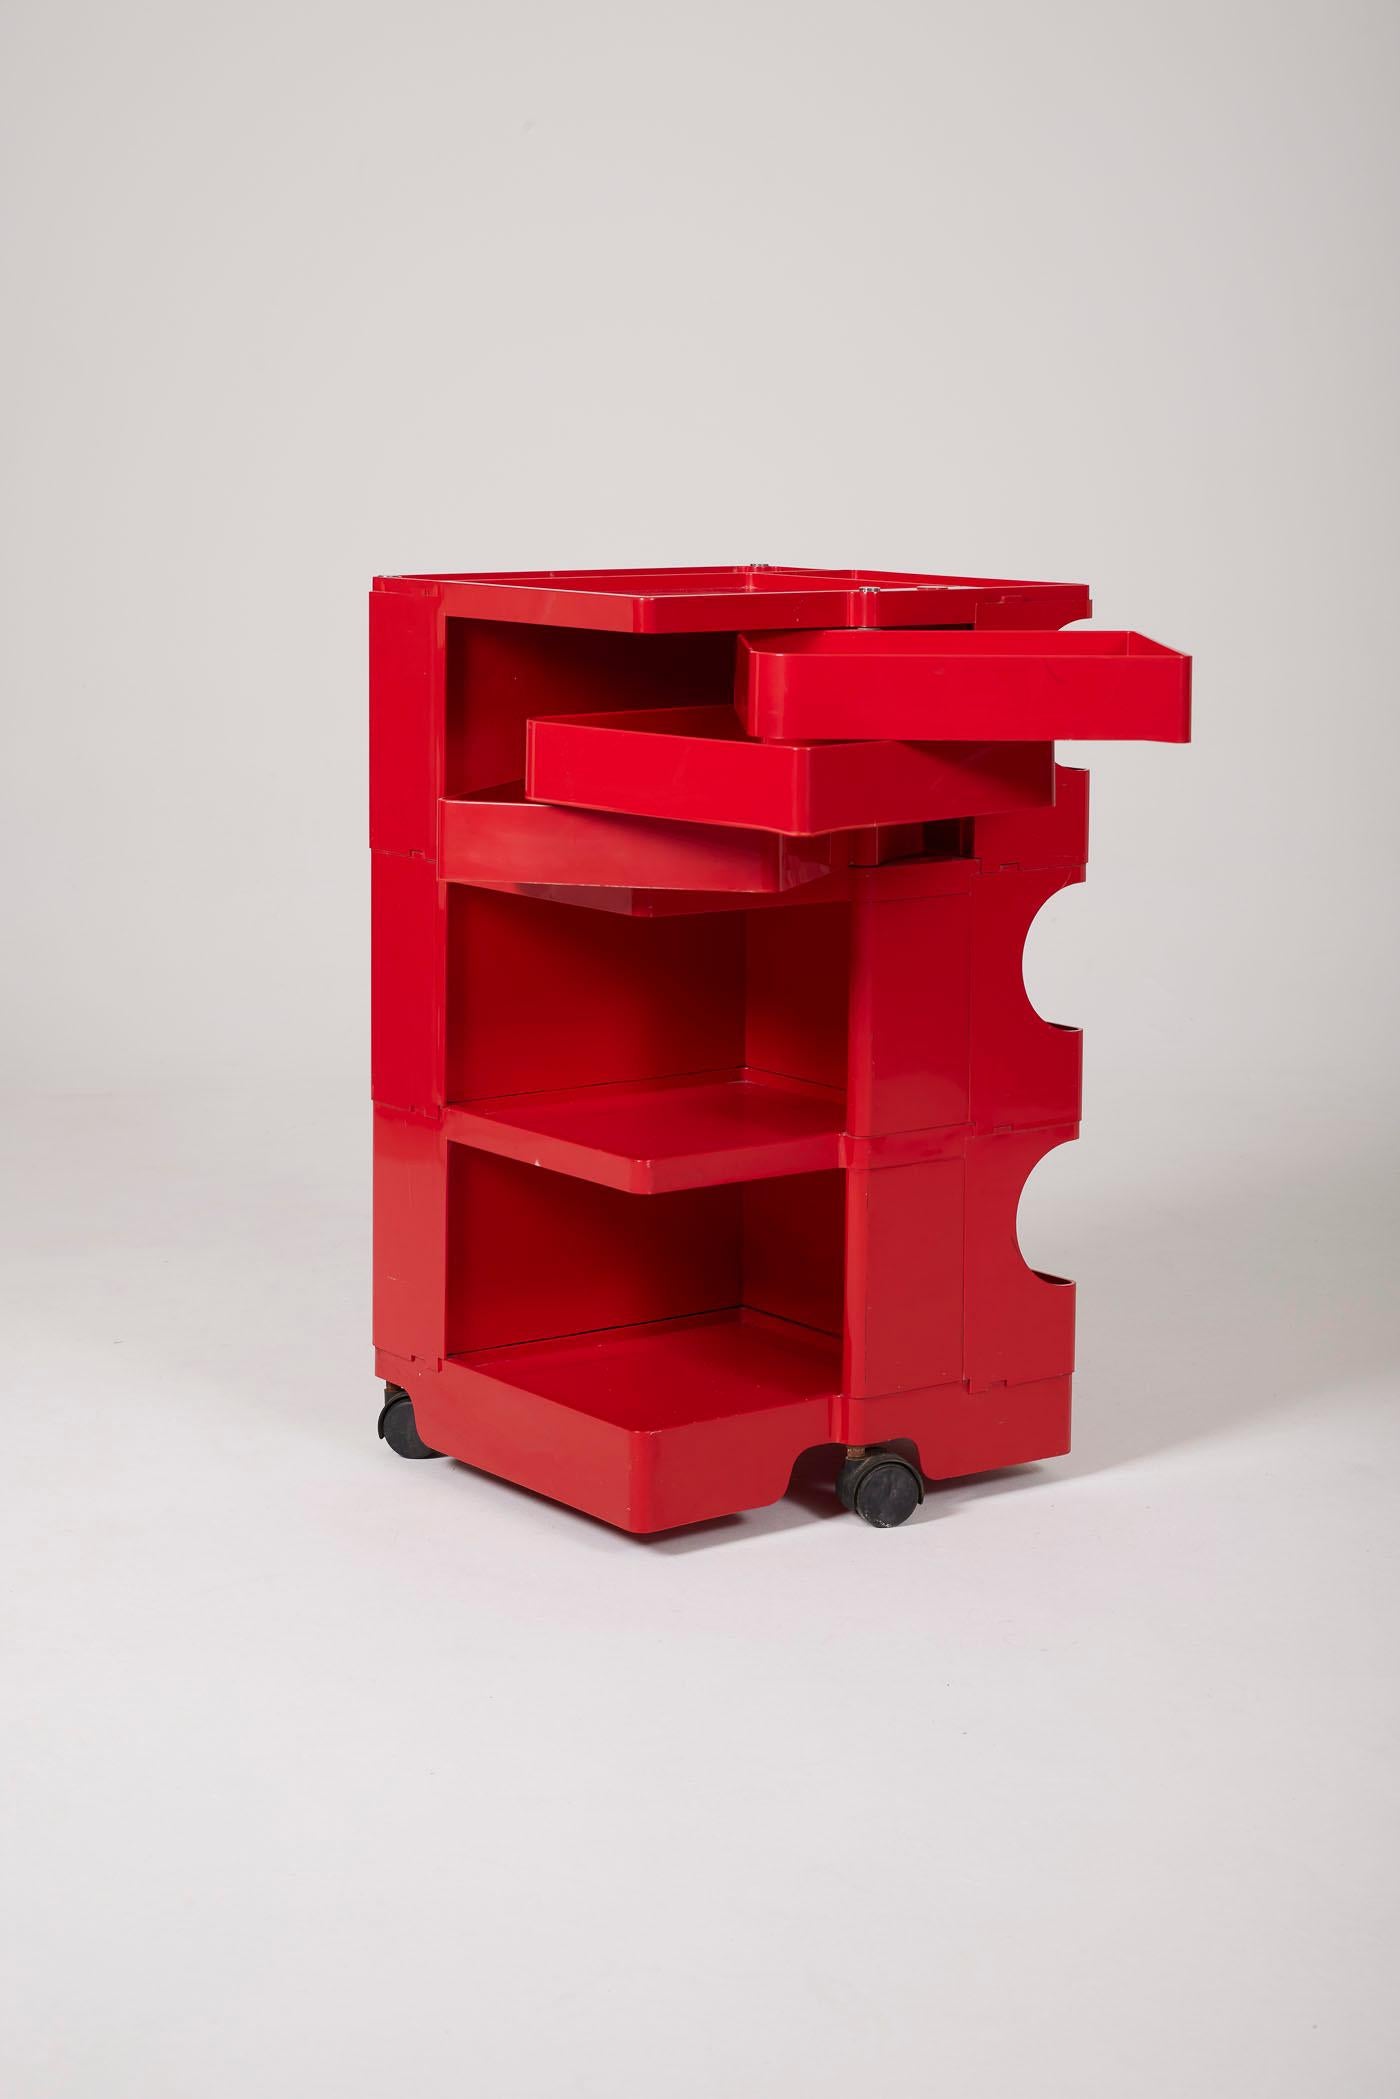 Red Boby cart by Italian designer Joe Colombo, 1970s. Made of molded ABS resin, this cart is modular and consists of 3 removable drawers mounted on wheels. It is signed in the material. Some slight signs of wear to report.
DV450